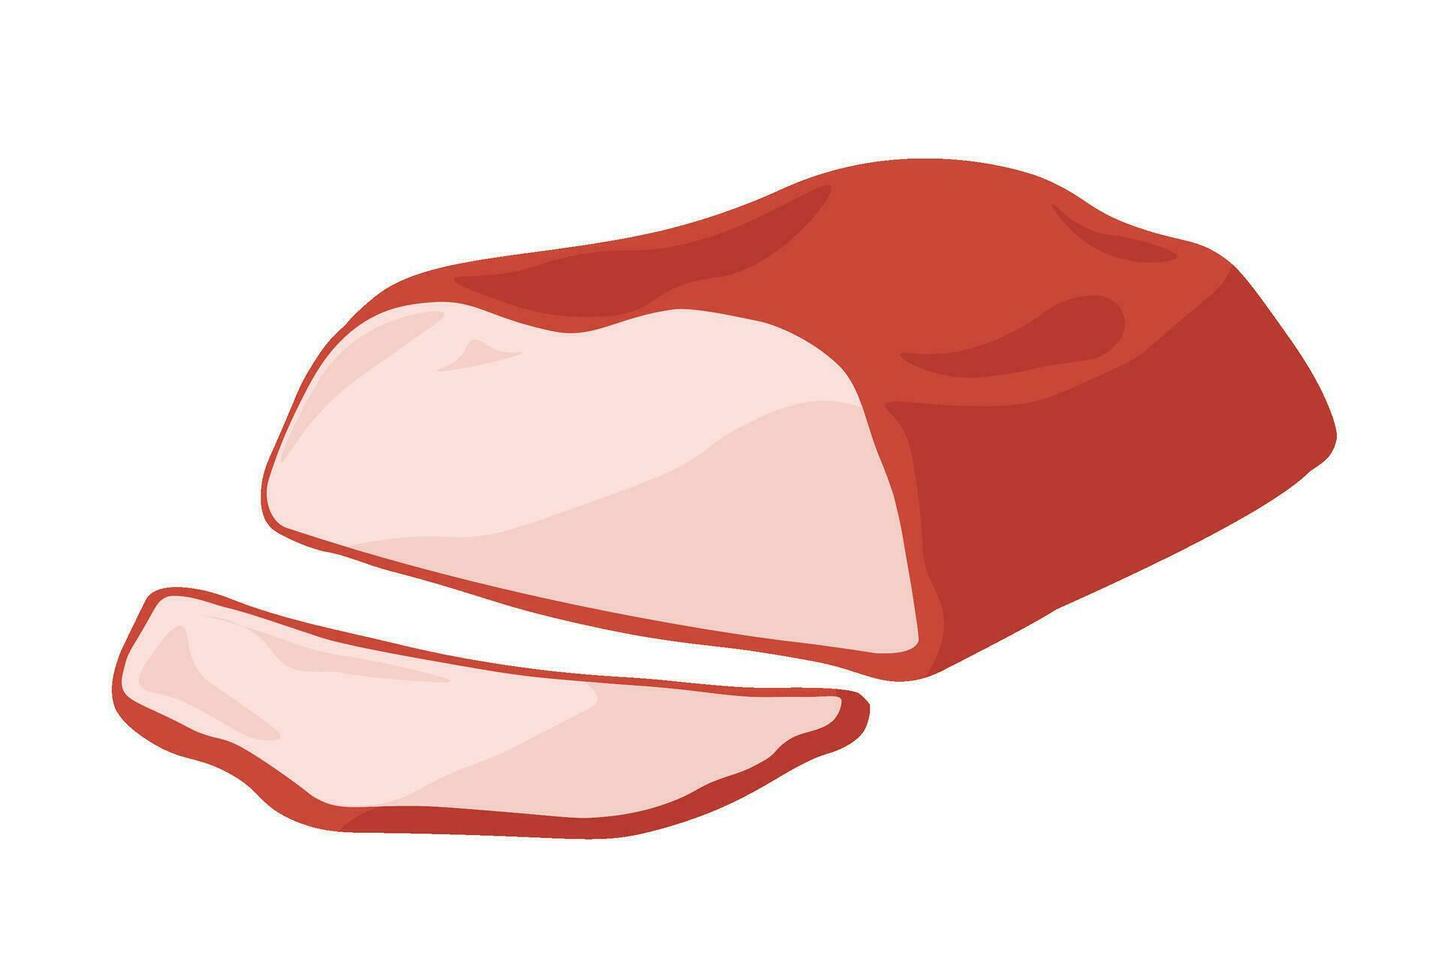 Meat product, smoked ham butchery department store vector